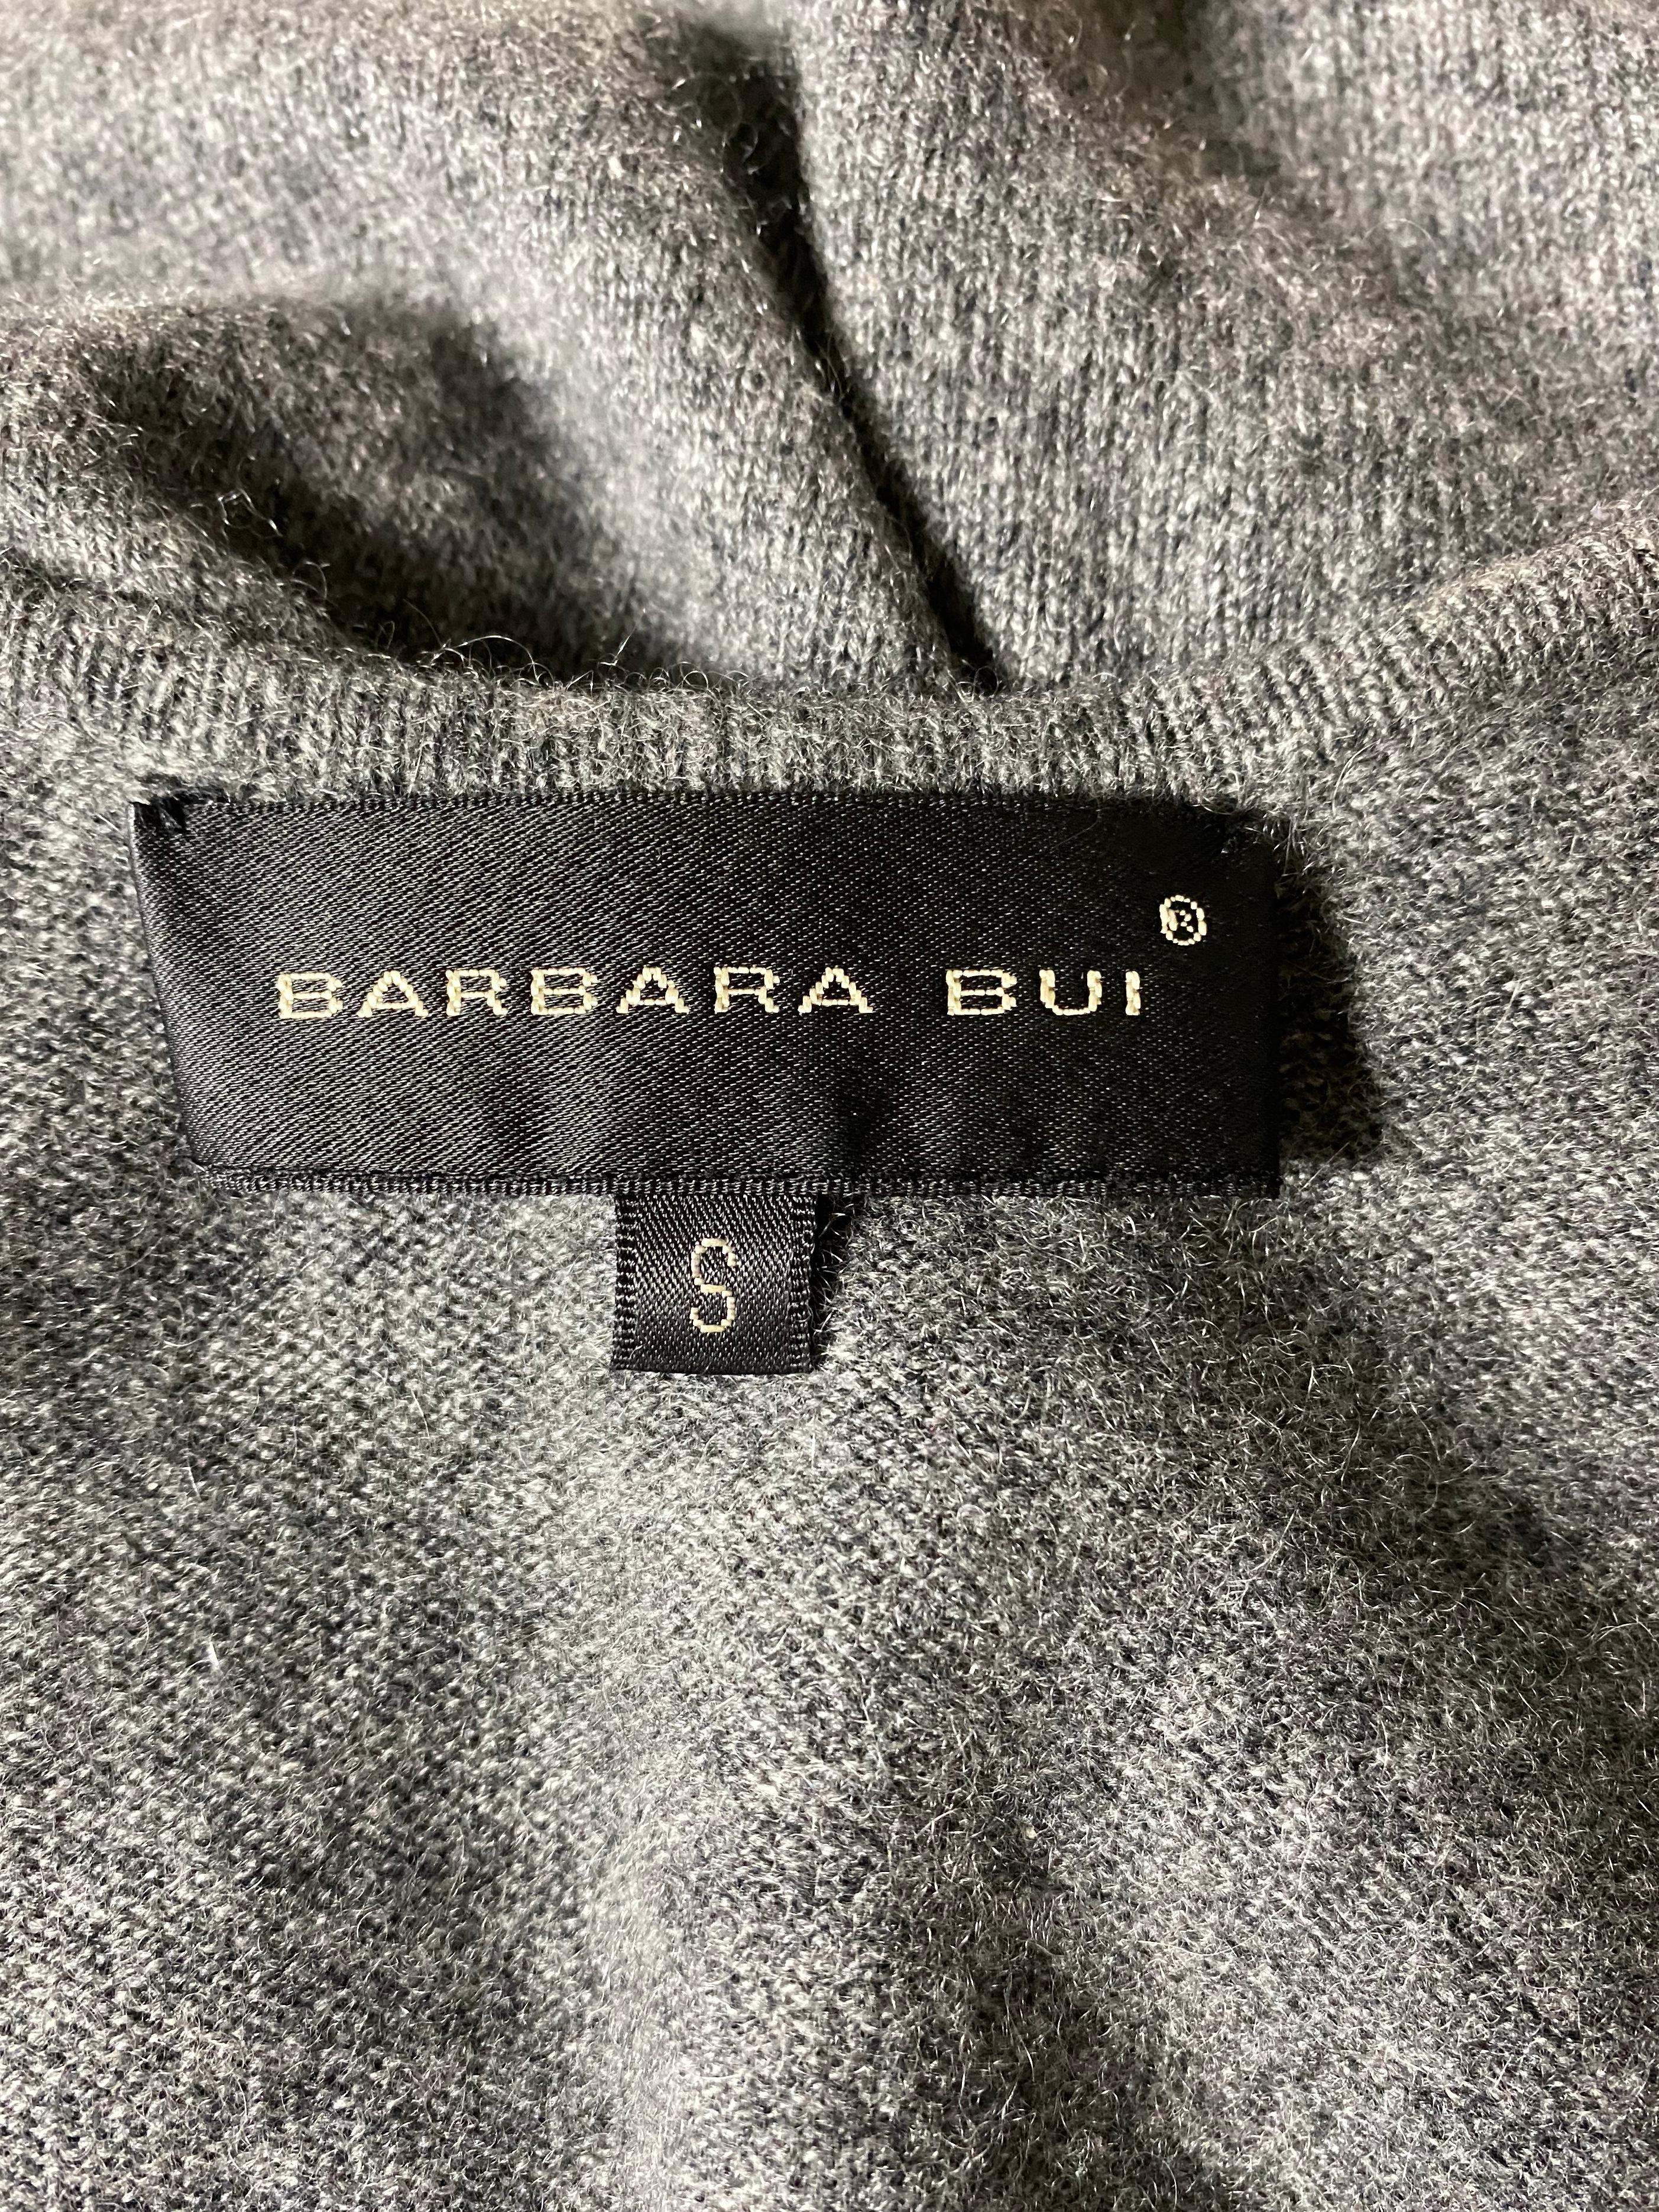 Women's or Men's Barbara Bui Grey Cashmere Long Sleeves Pullover Sweater Size S  For Sale